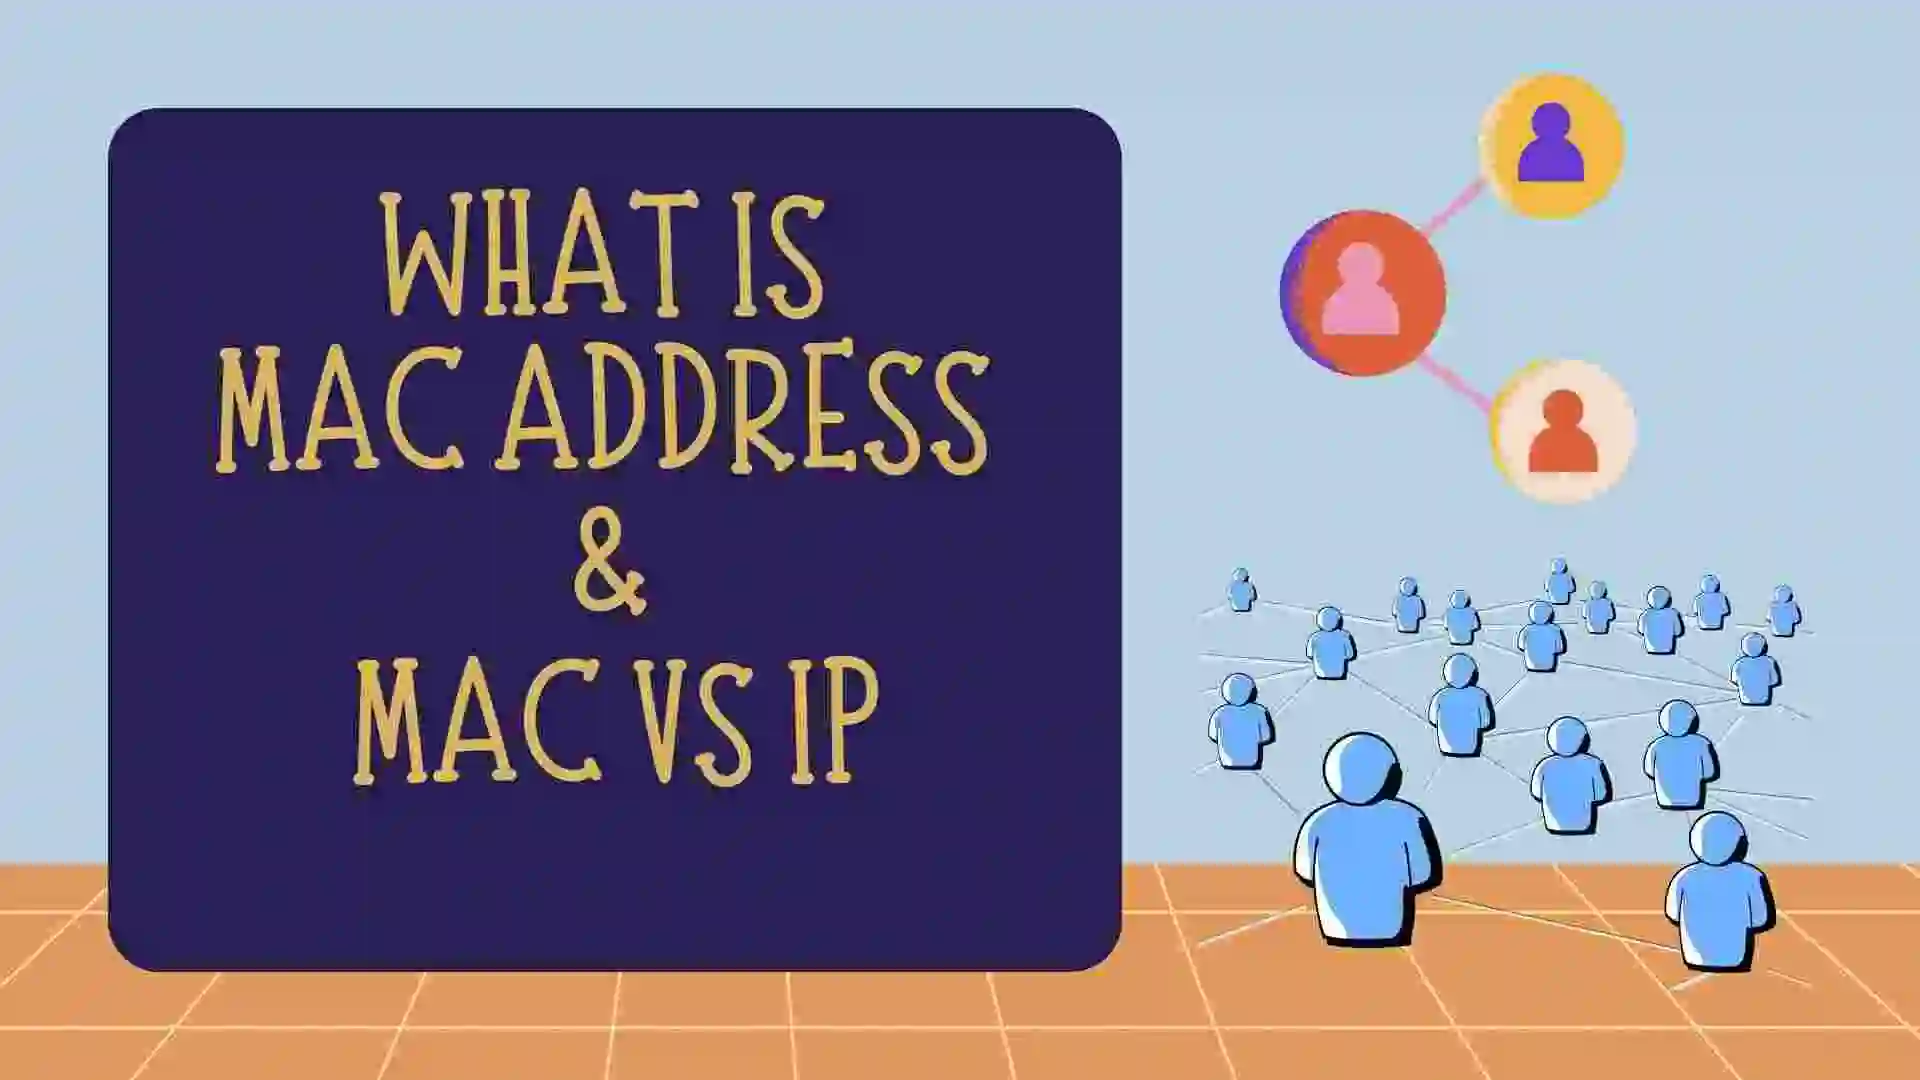 MAC address is a hardware address that is assigned to every network interface card or device by the manufacturer at the time of production.